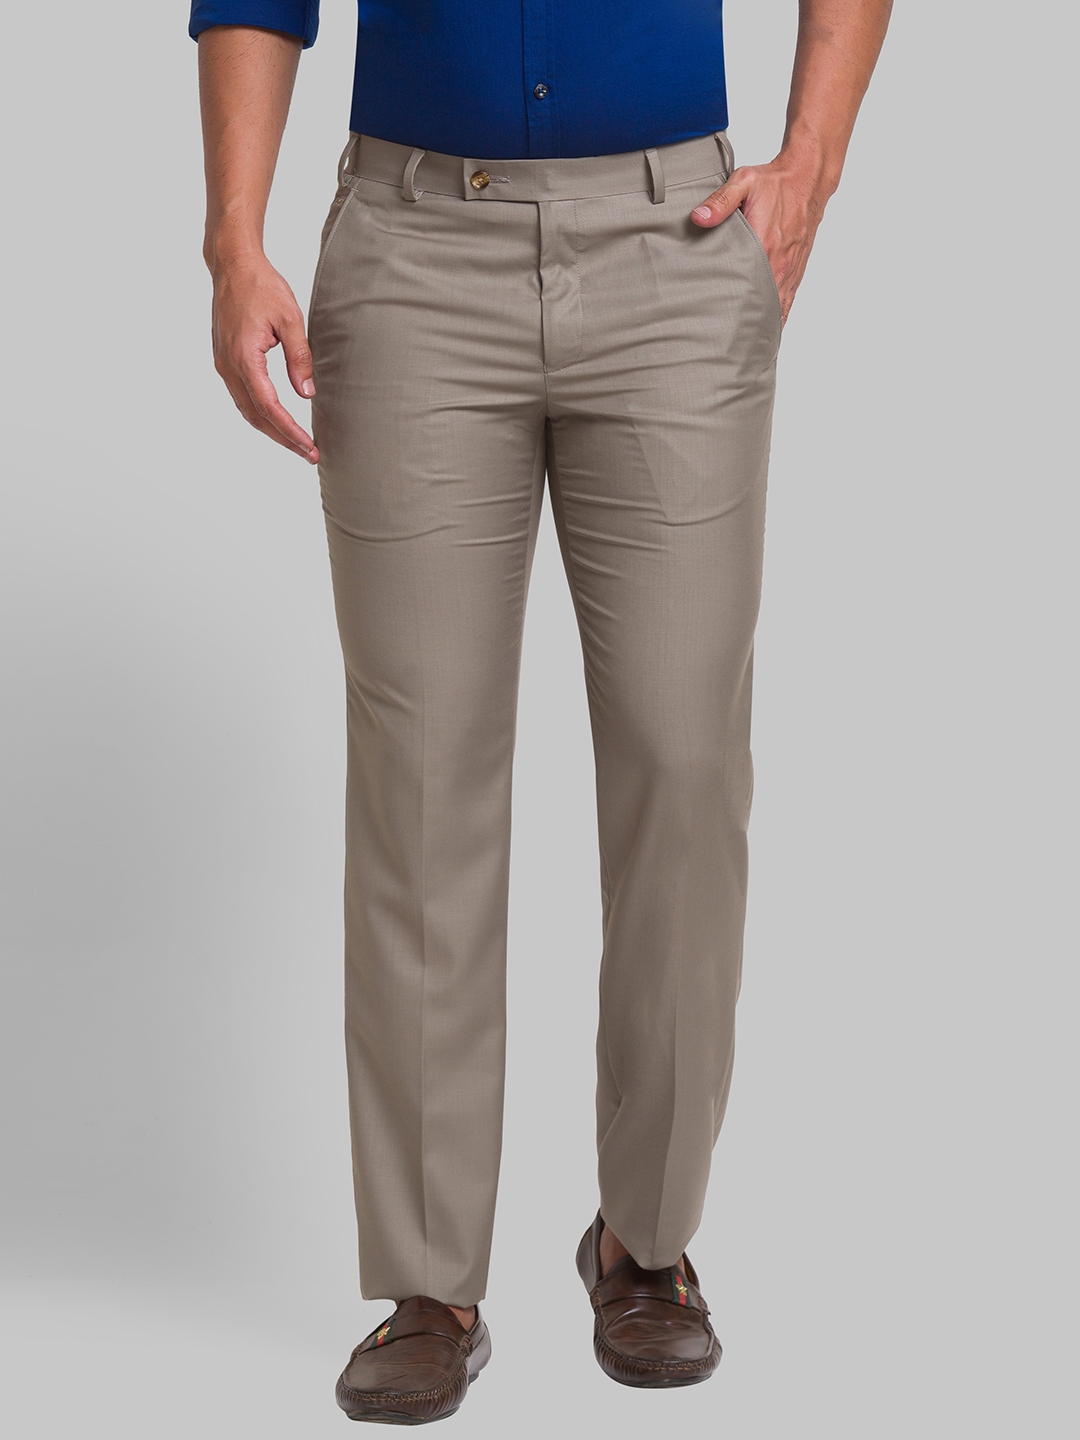 Buy PARK AVENUE Structured Polyester Blend Slim Fit Men's Work Wear Trousers  | Shoppers Stop